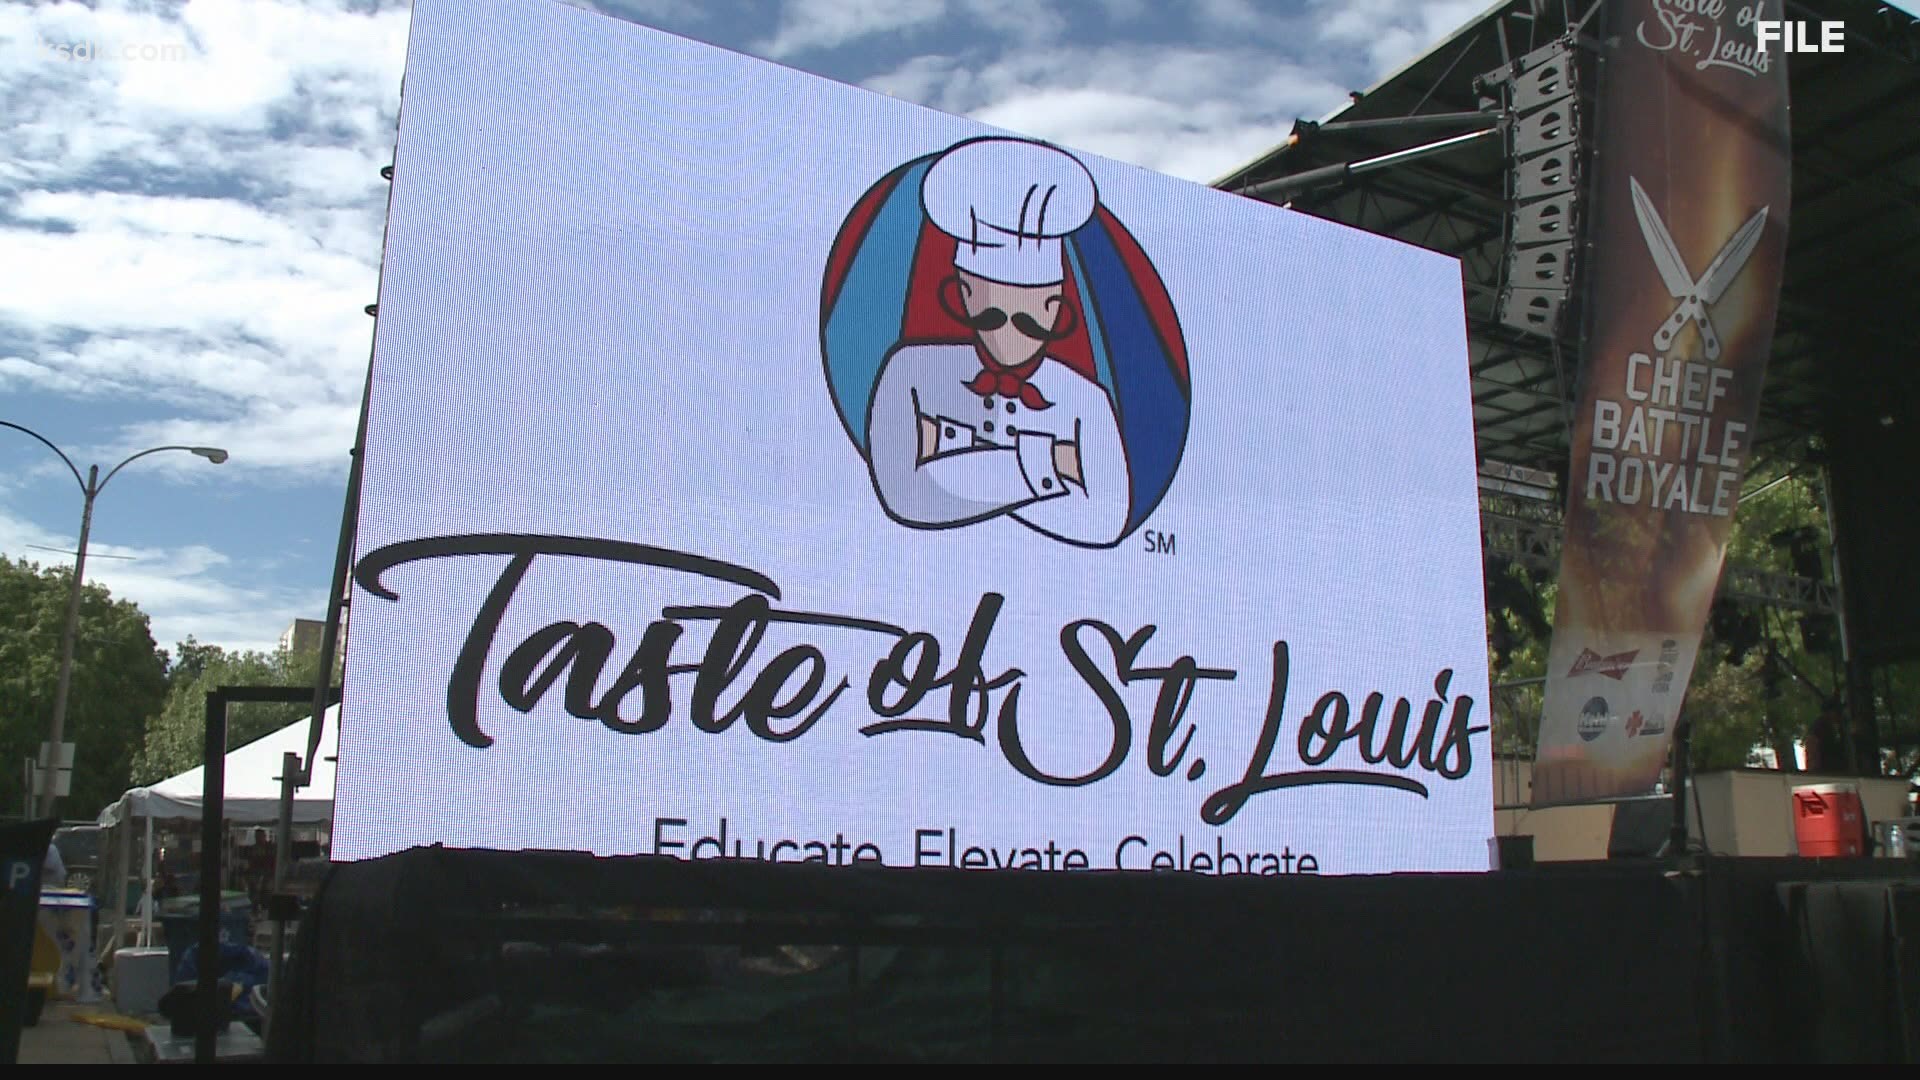 Taste of St. Louis is coming back in 2021 and KSDK's Abby Eats St. Louis podcast has the exclusive details. Download the latest episode for more information.